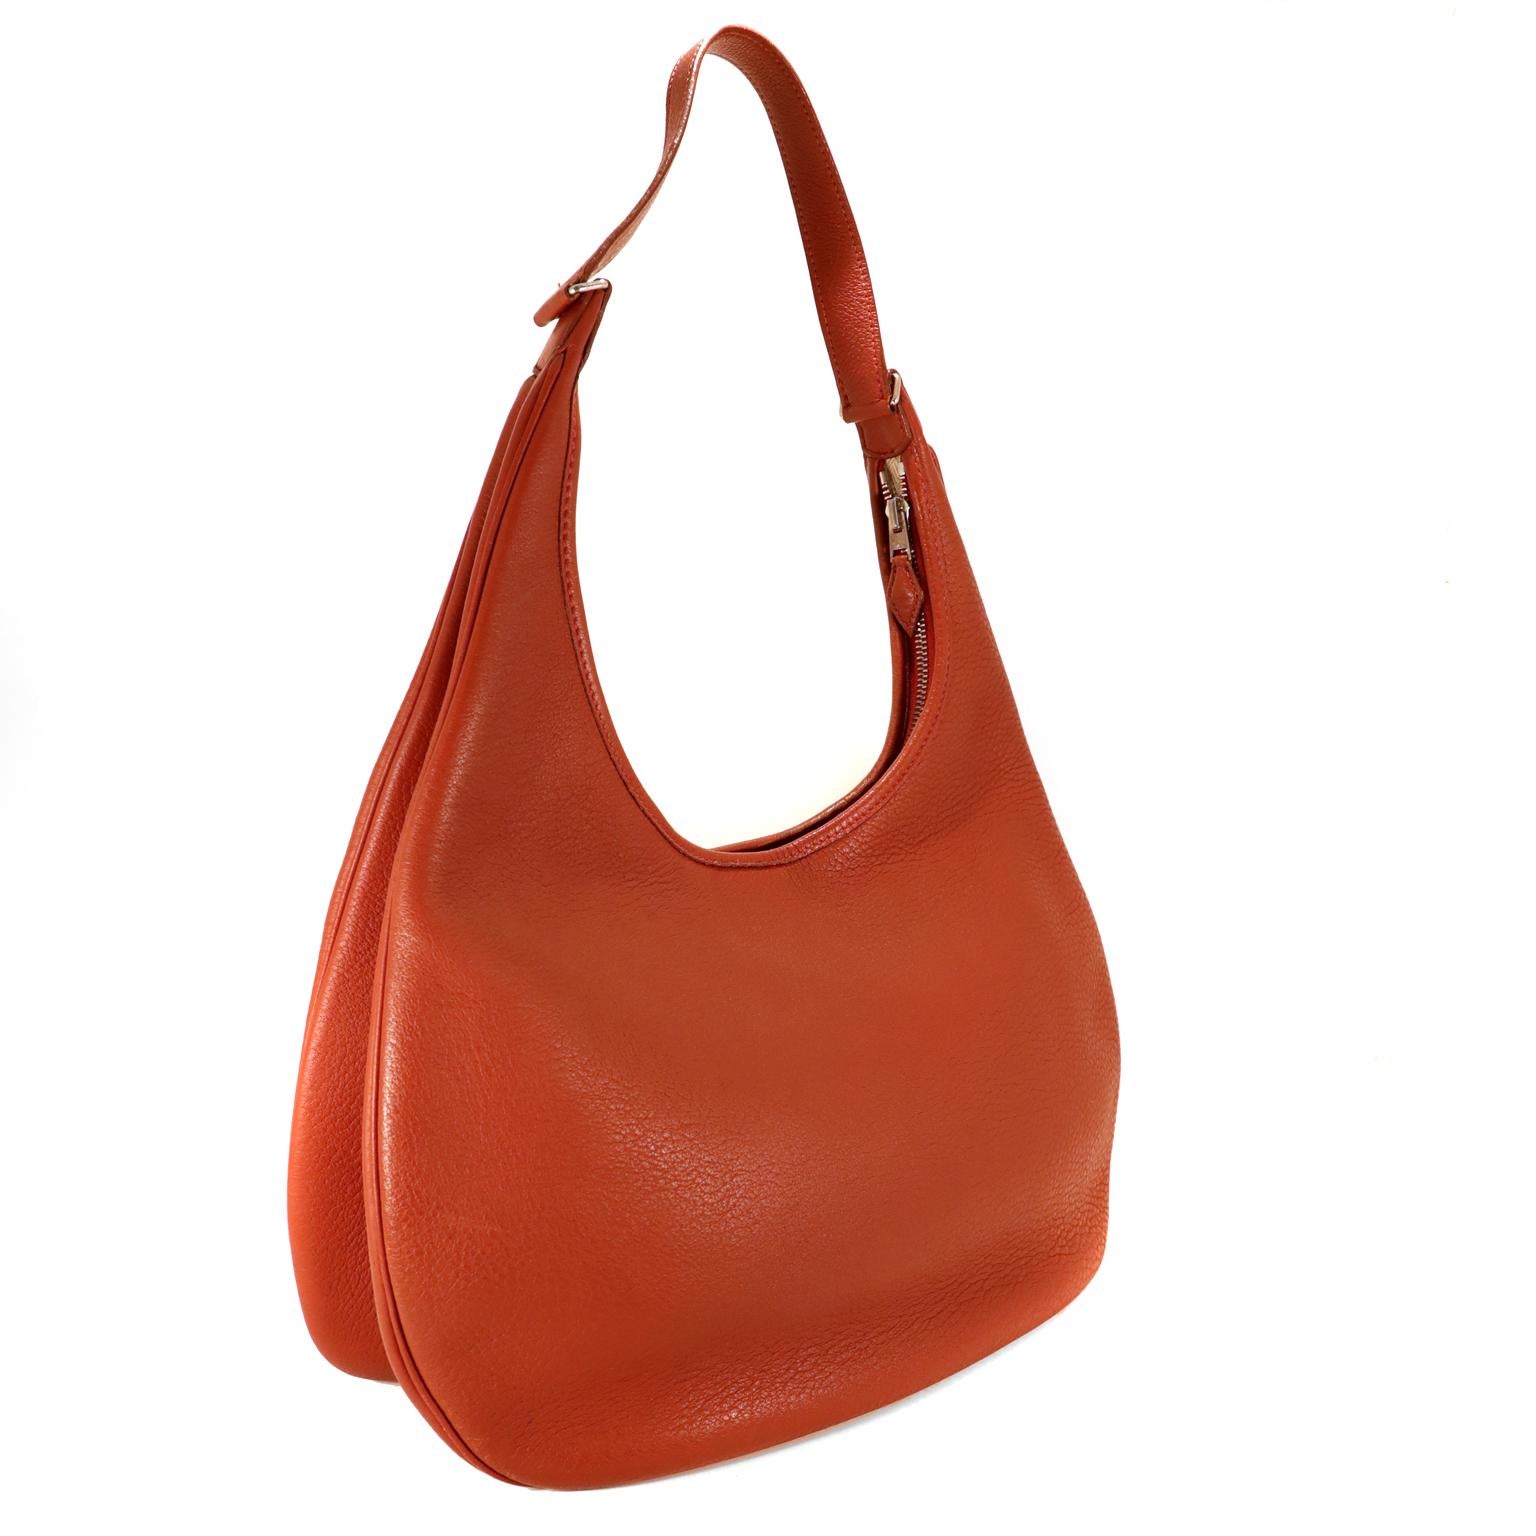 This authentic Hermès Rust Clemence Gao Hobo is in very good condition.  It has enjoyed a previous life and has minor imperfections.  The Gao is no longer in production but remains an understated classic style for everyday enjoyment.  
Rich rust